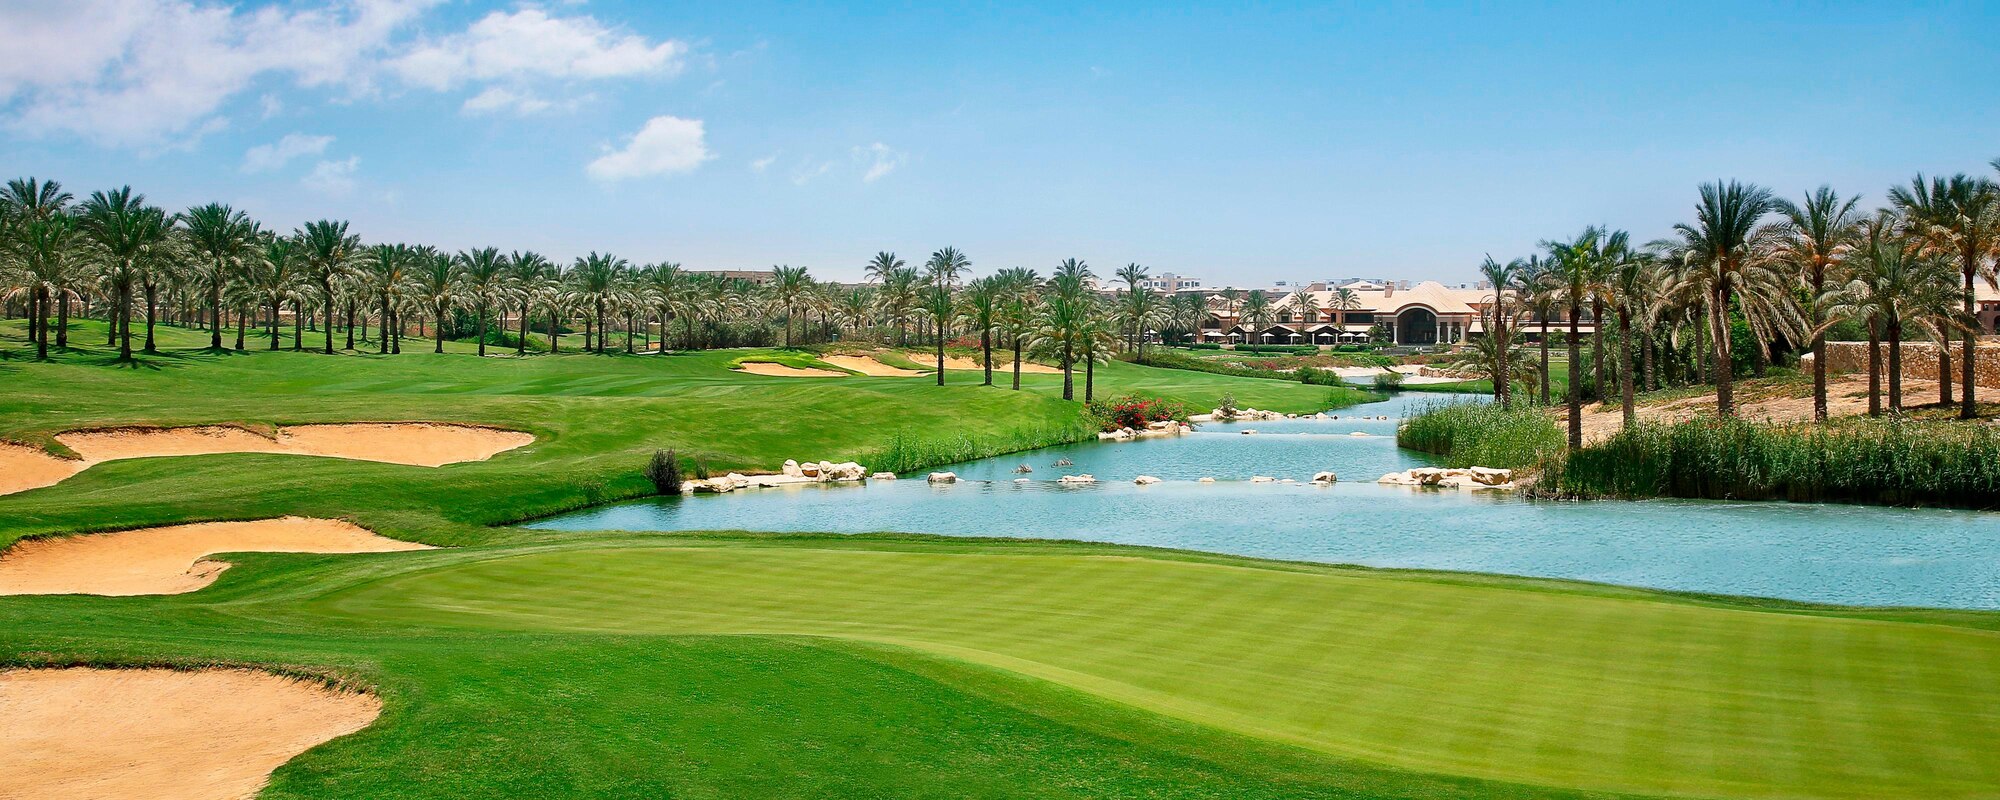 golf , palm , trees and lake